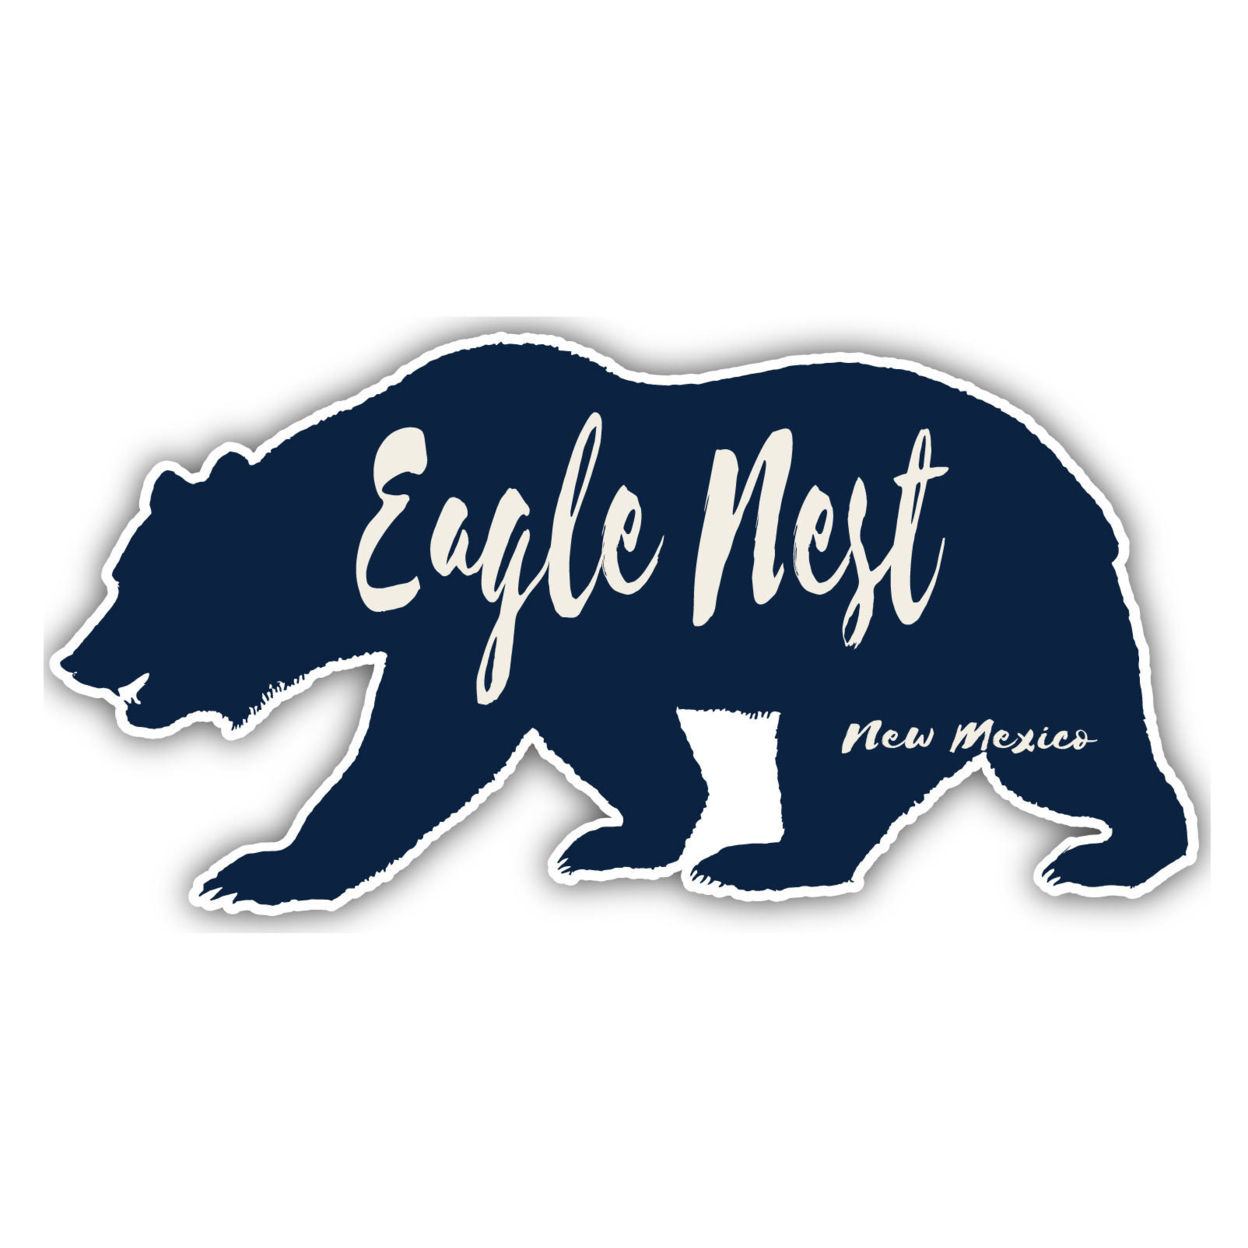 Eagle Nest New Mexico Souvenir Decorative Stickers (Choose Theme And Size) - 4-Pack, 4-Inch, Great Outdoors